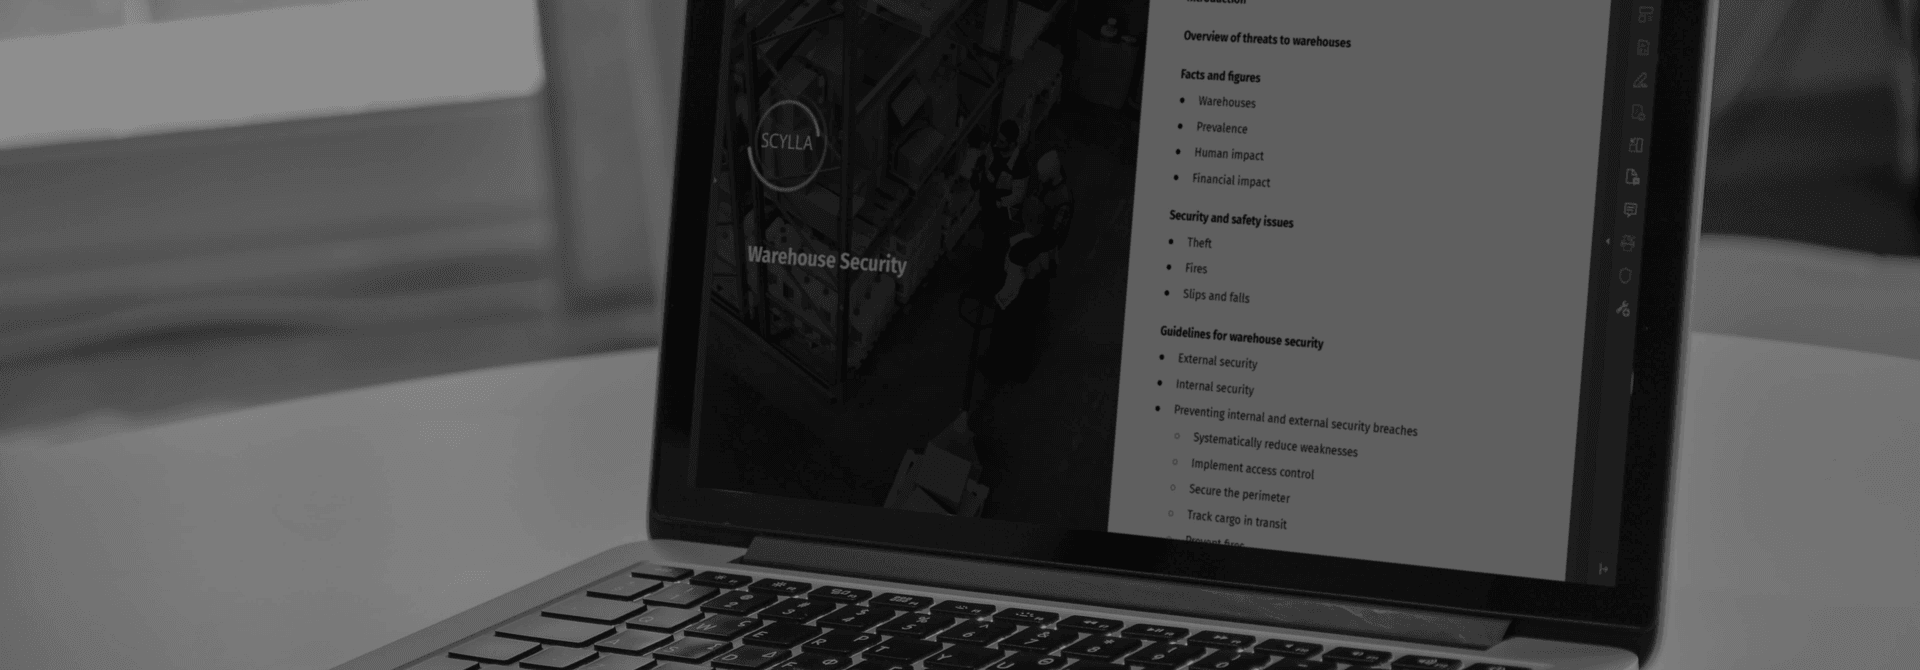 Download the Guide on Warehouse Security